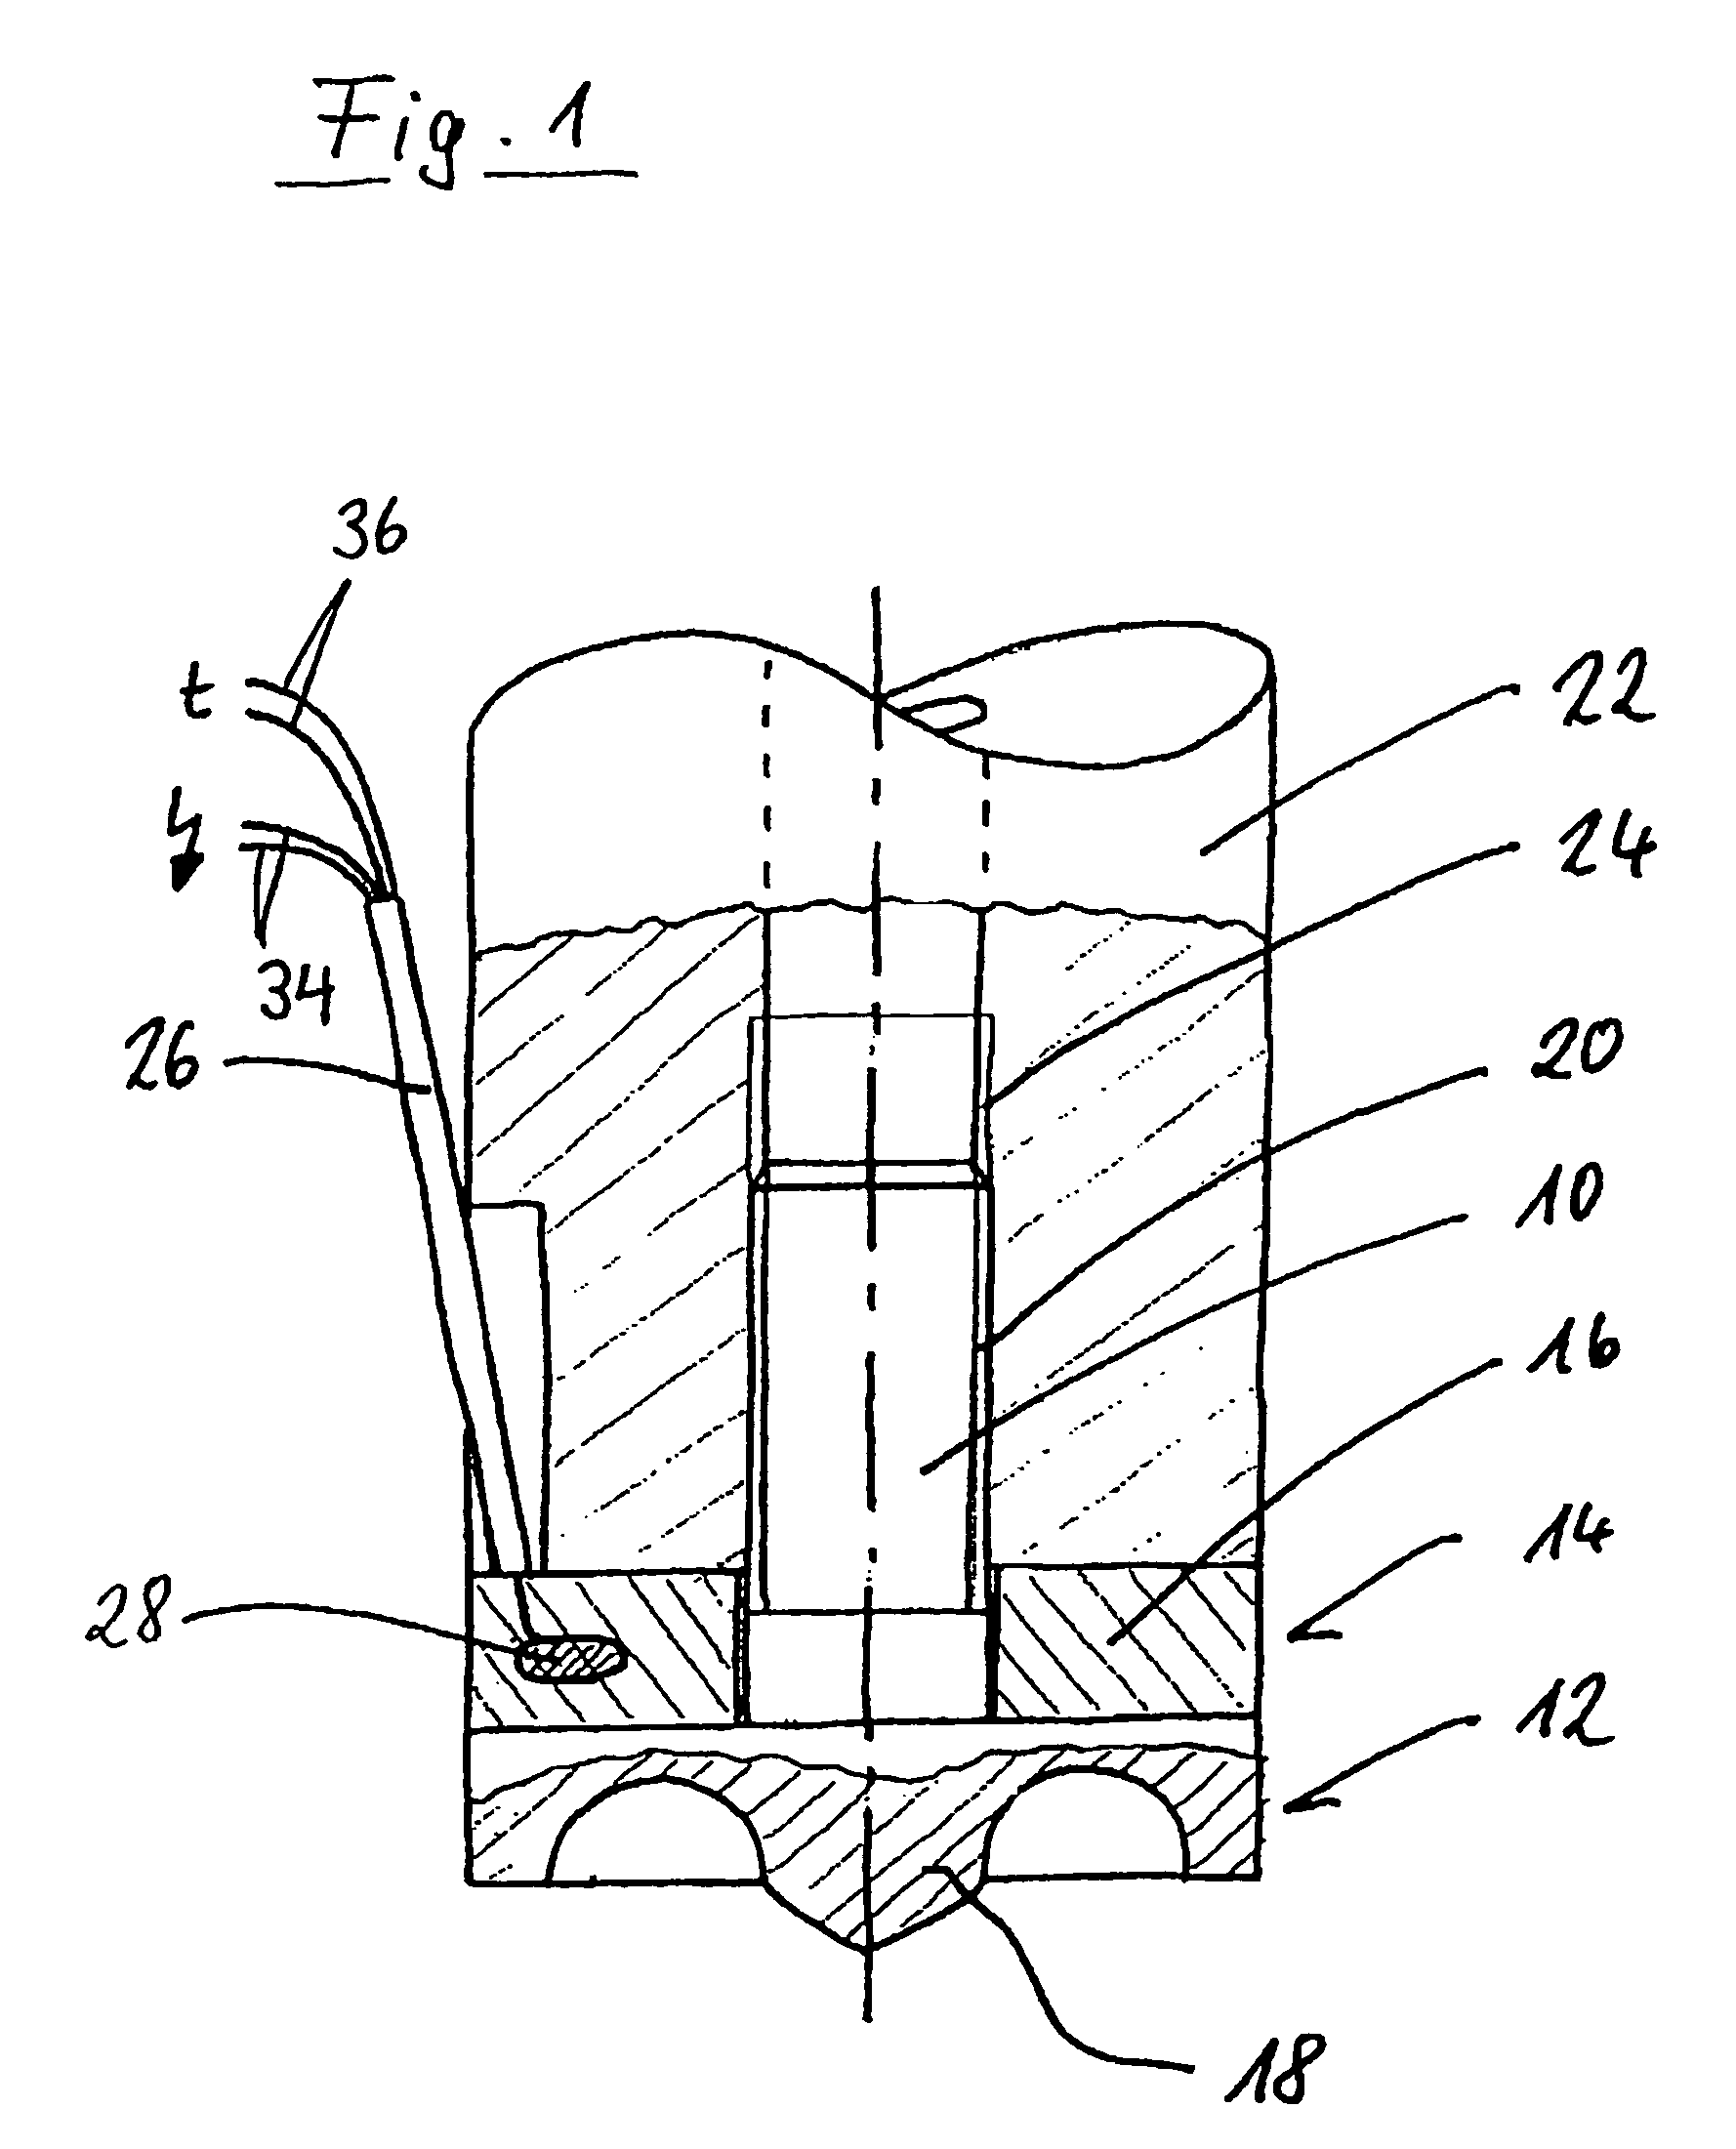 Apparatus for the connection of articles via at least one connection element plasticizable by heat